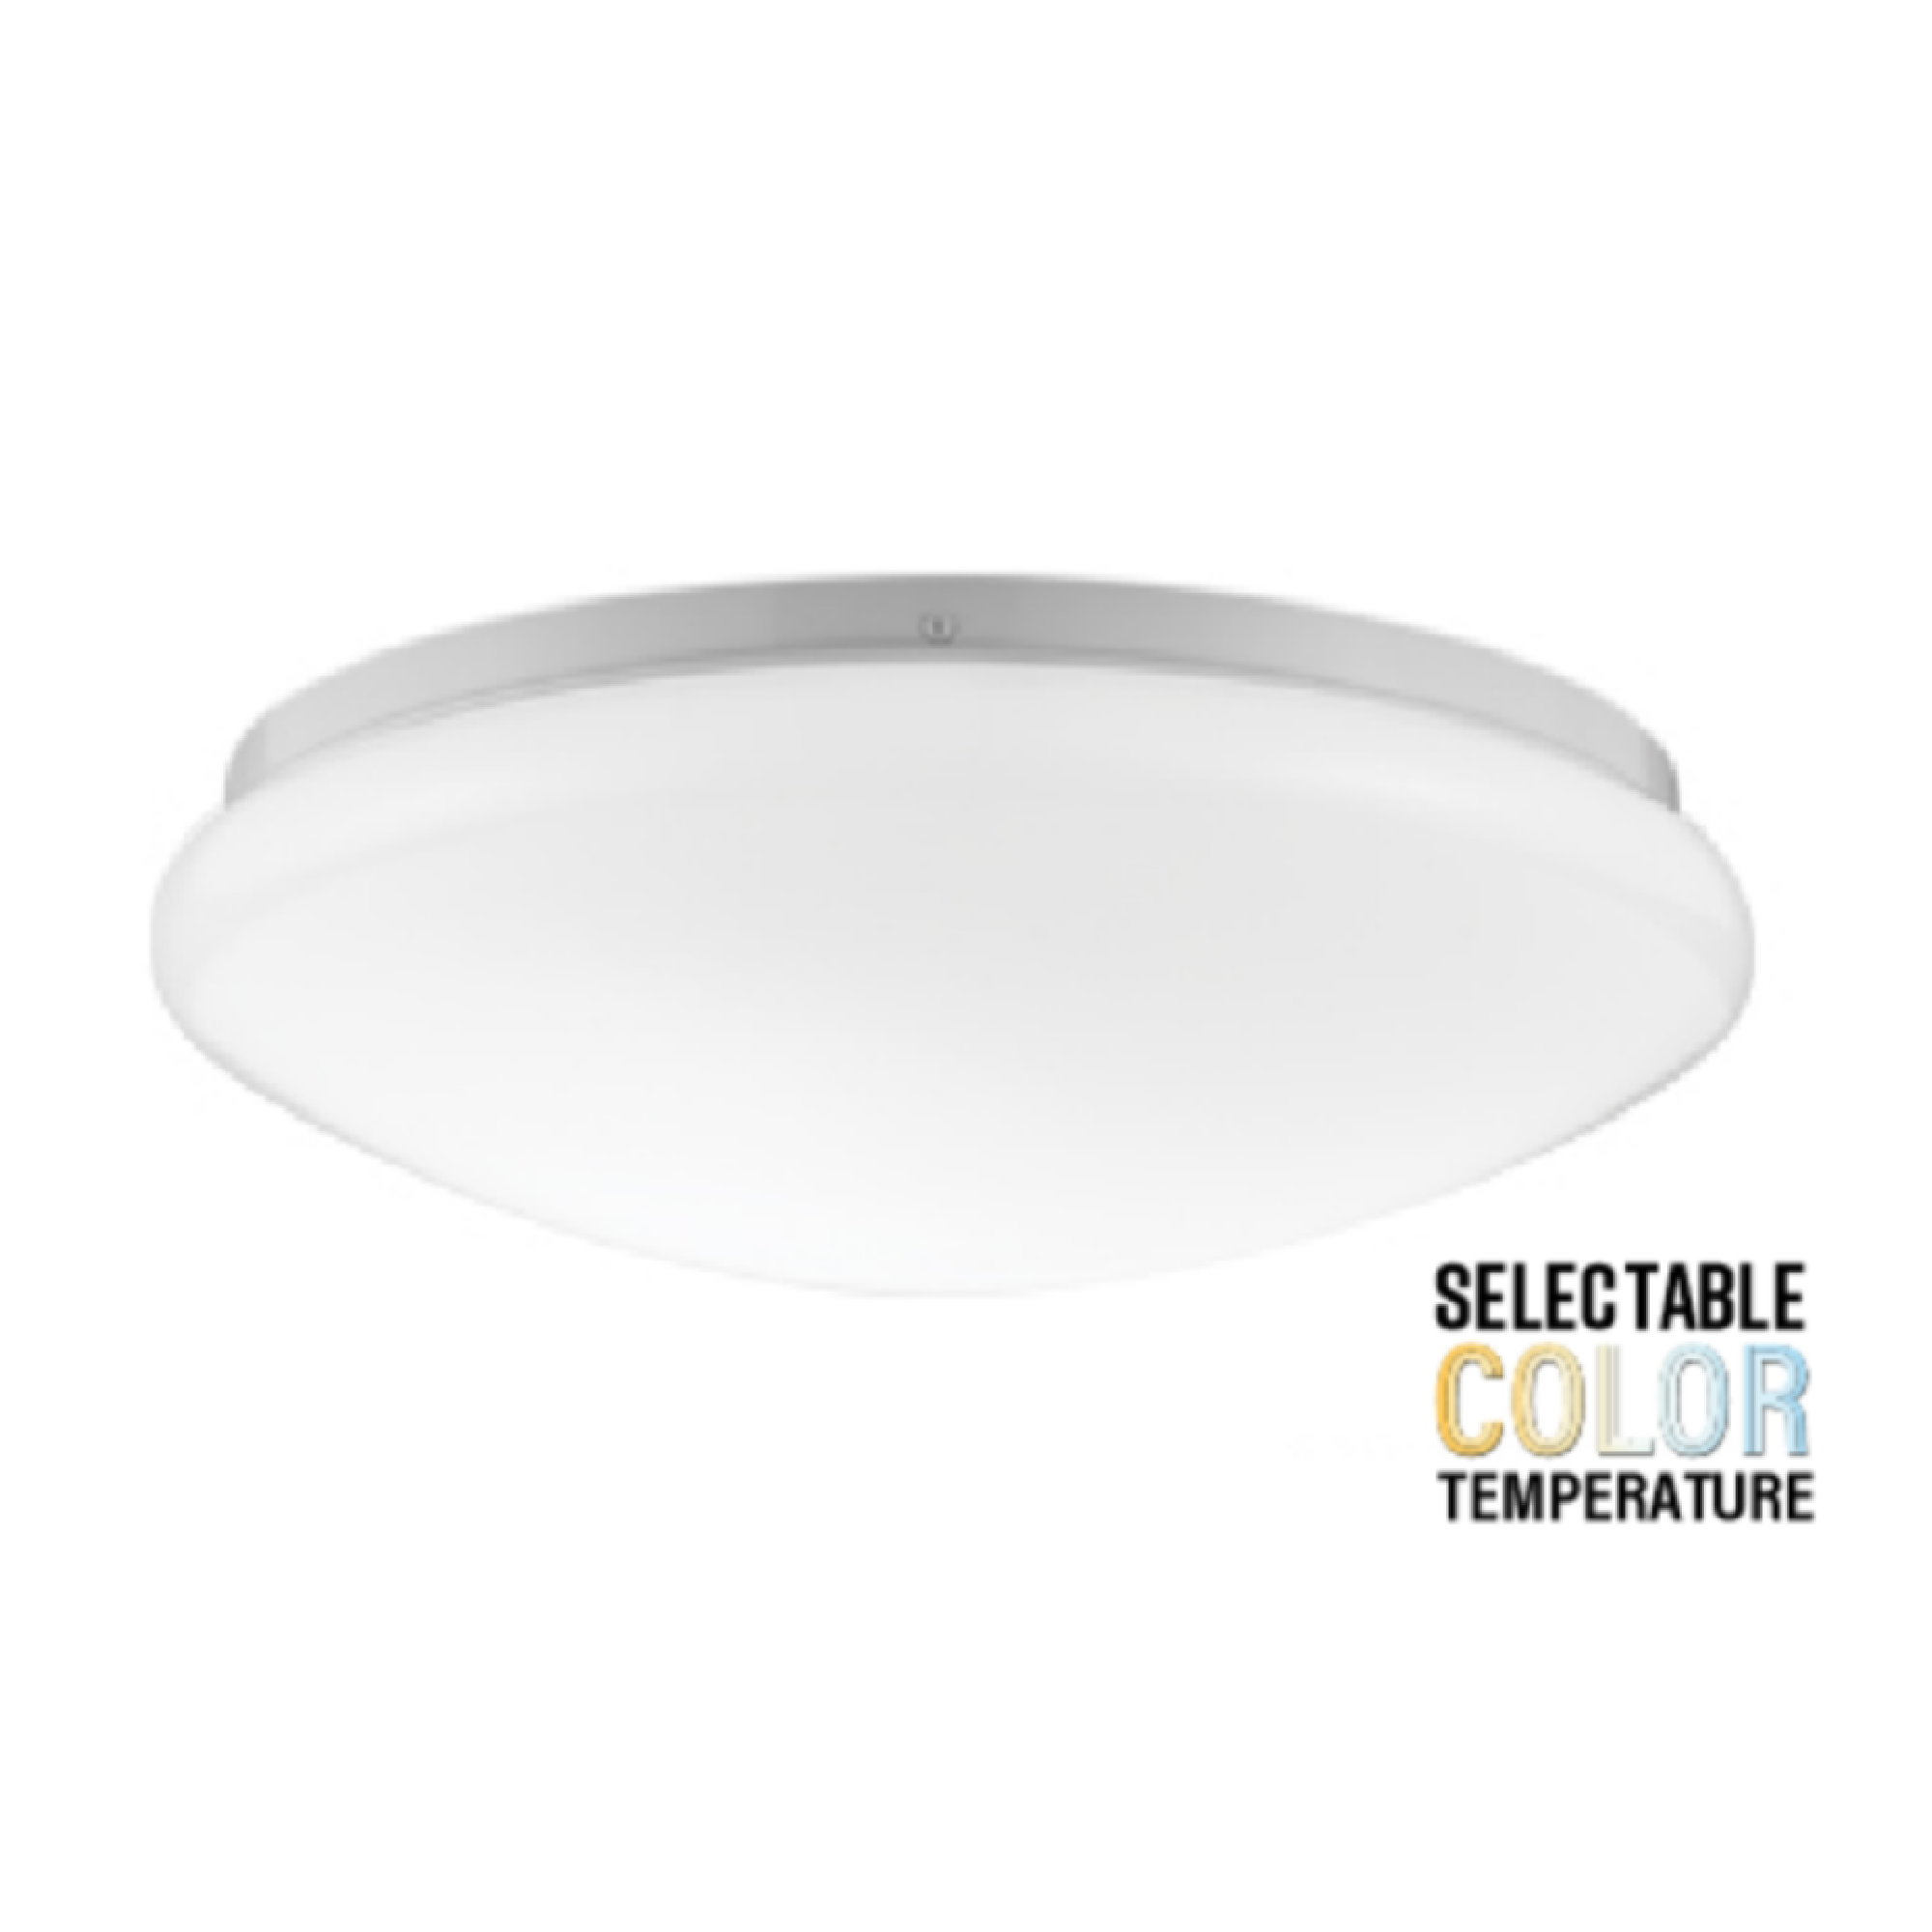 13 Inch Round Mushroom Ceiling Light, Surface Mount, Selectable CCT, 1400 Lumens